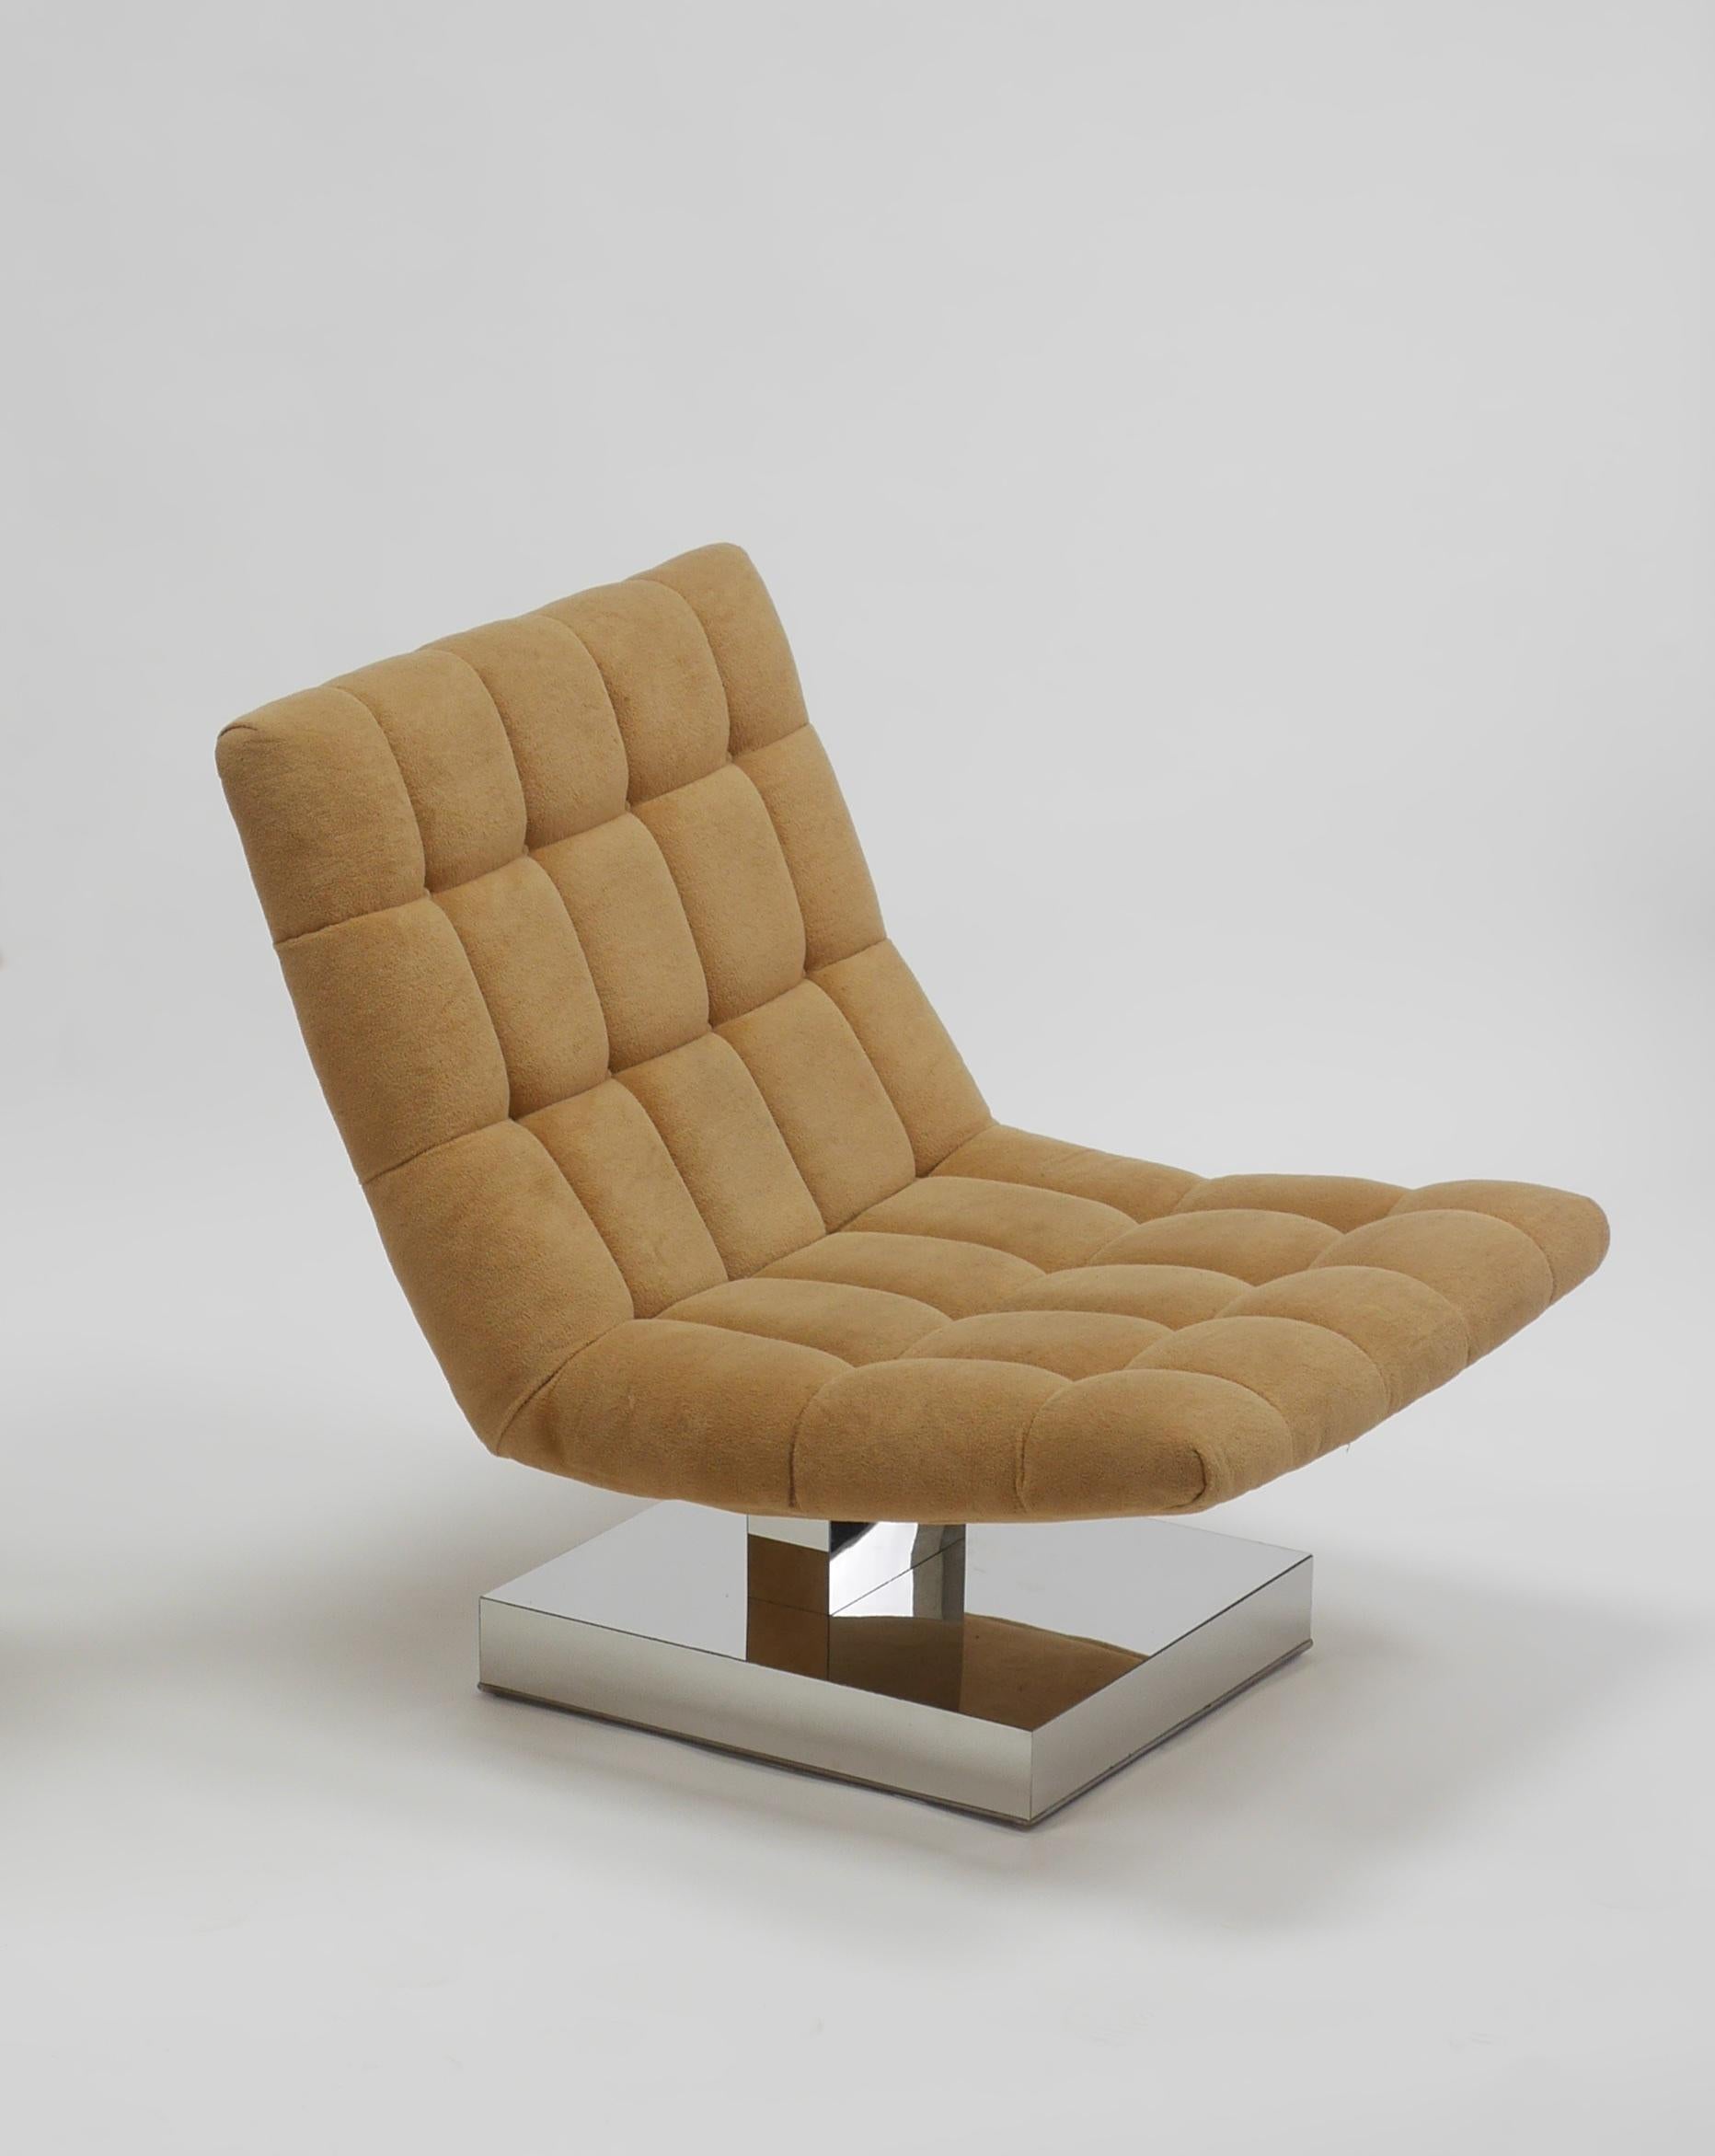 Cantilevered lounge chair by Milo Baughman. Having high polished stainless bases. Large, well made and very comfortable.